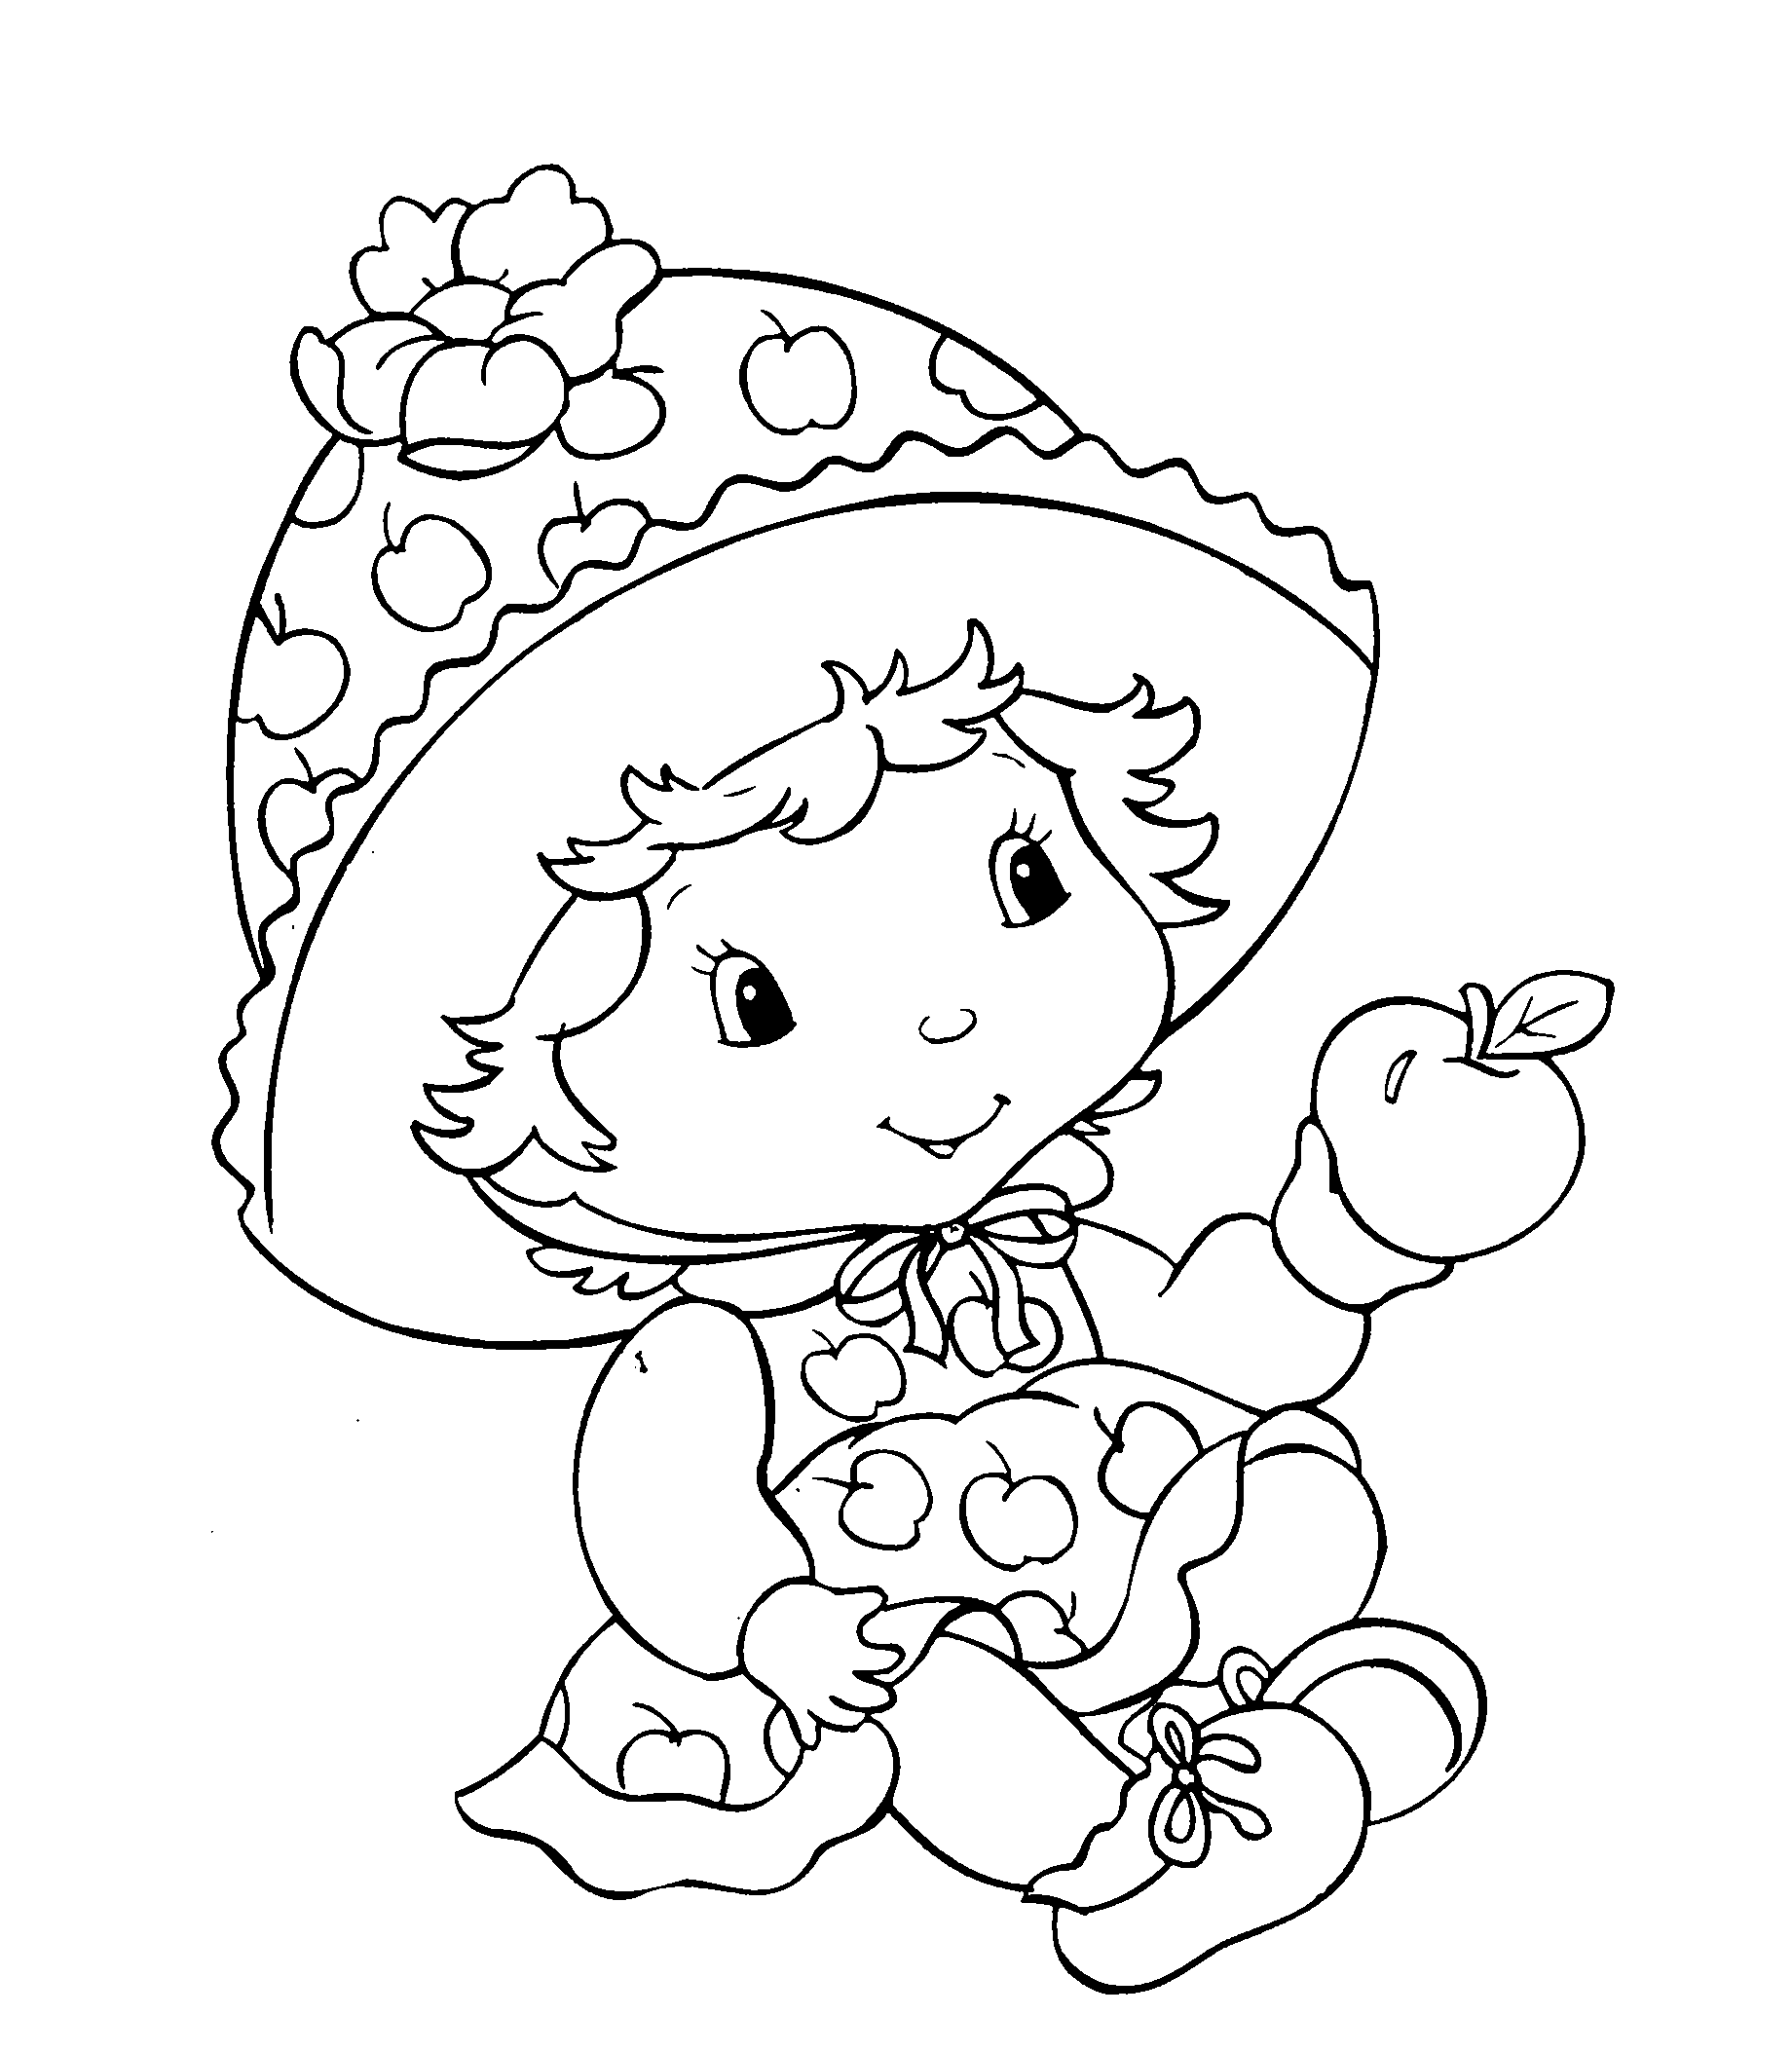 pictures of strawberry shortcake strawberry shortcake for children strawberry shortcake strawberry shortcake pictures of 